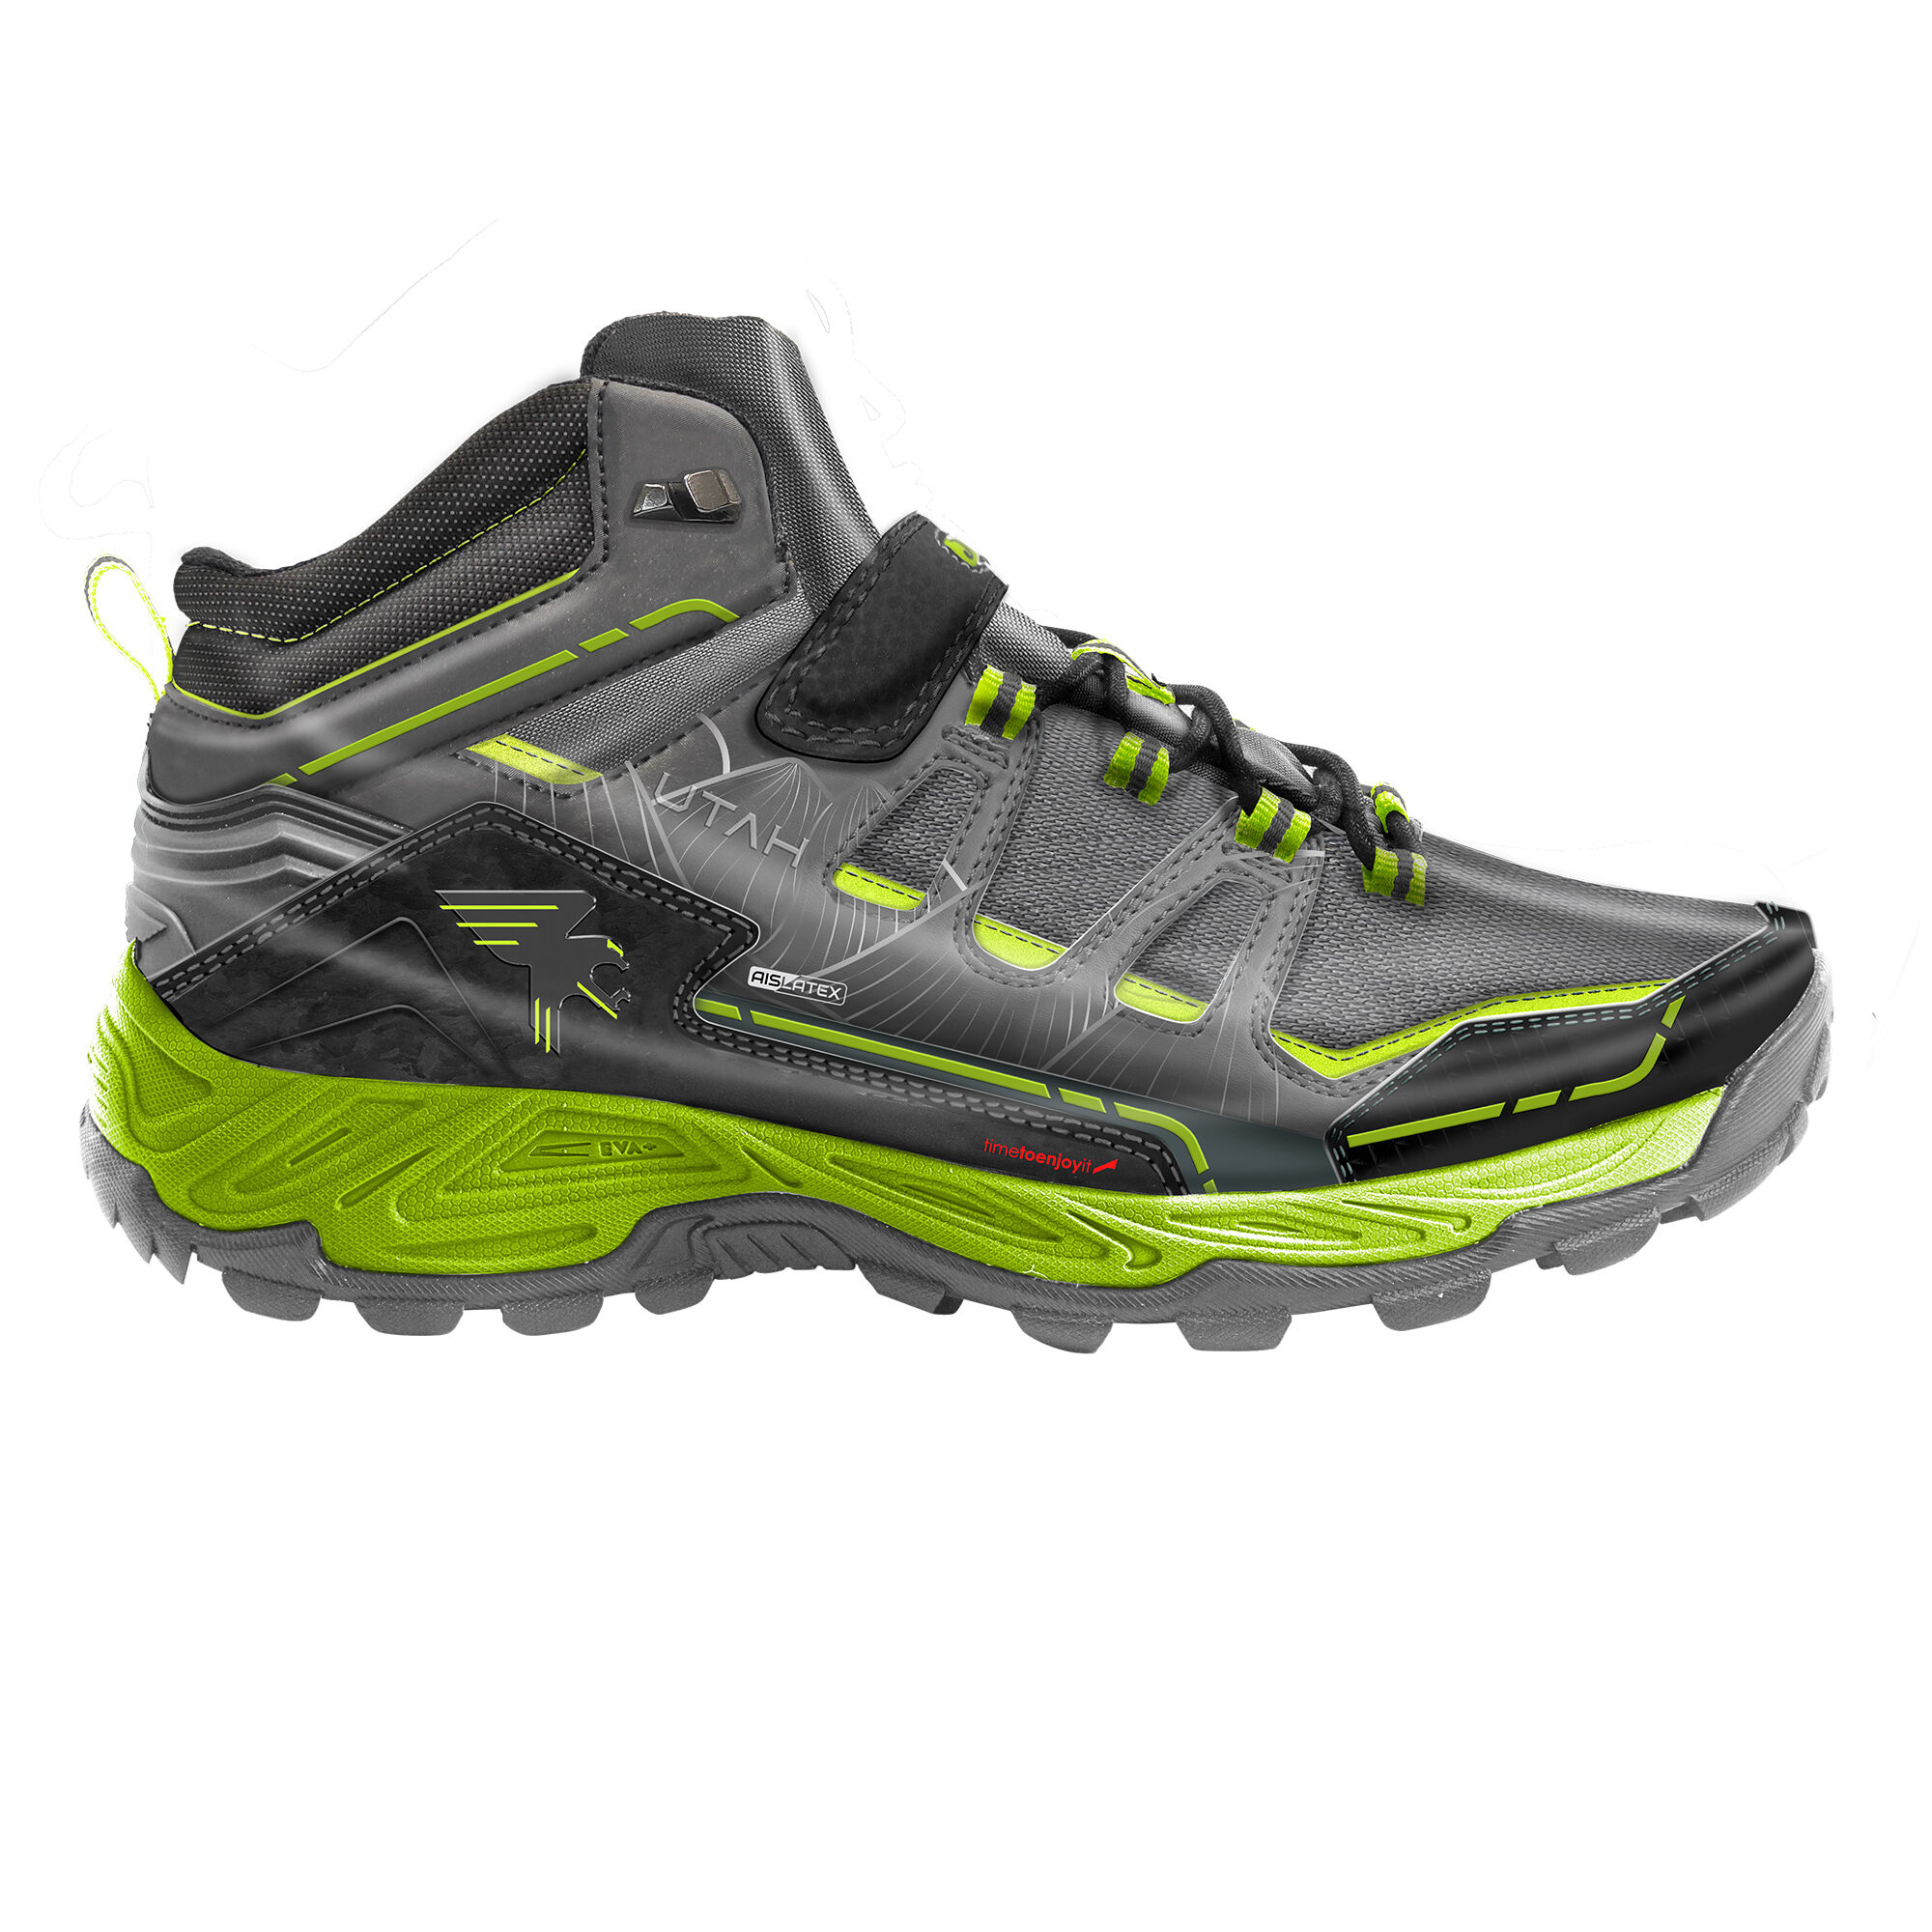 OUTDOORS BOOTS UTAH 22 JUNIOR GRAY LIME